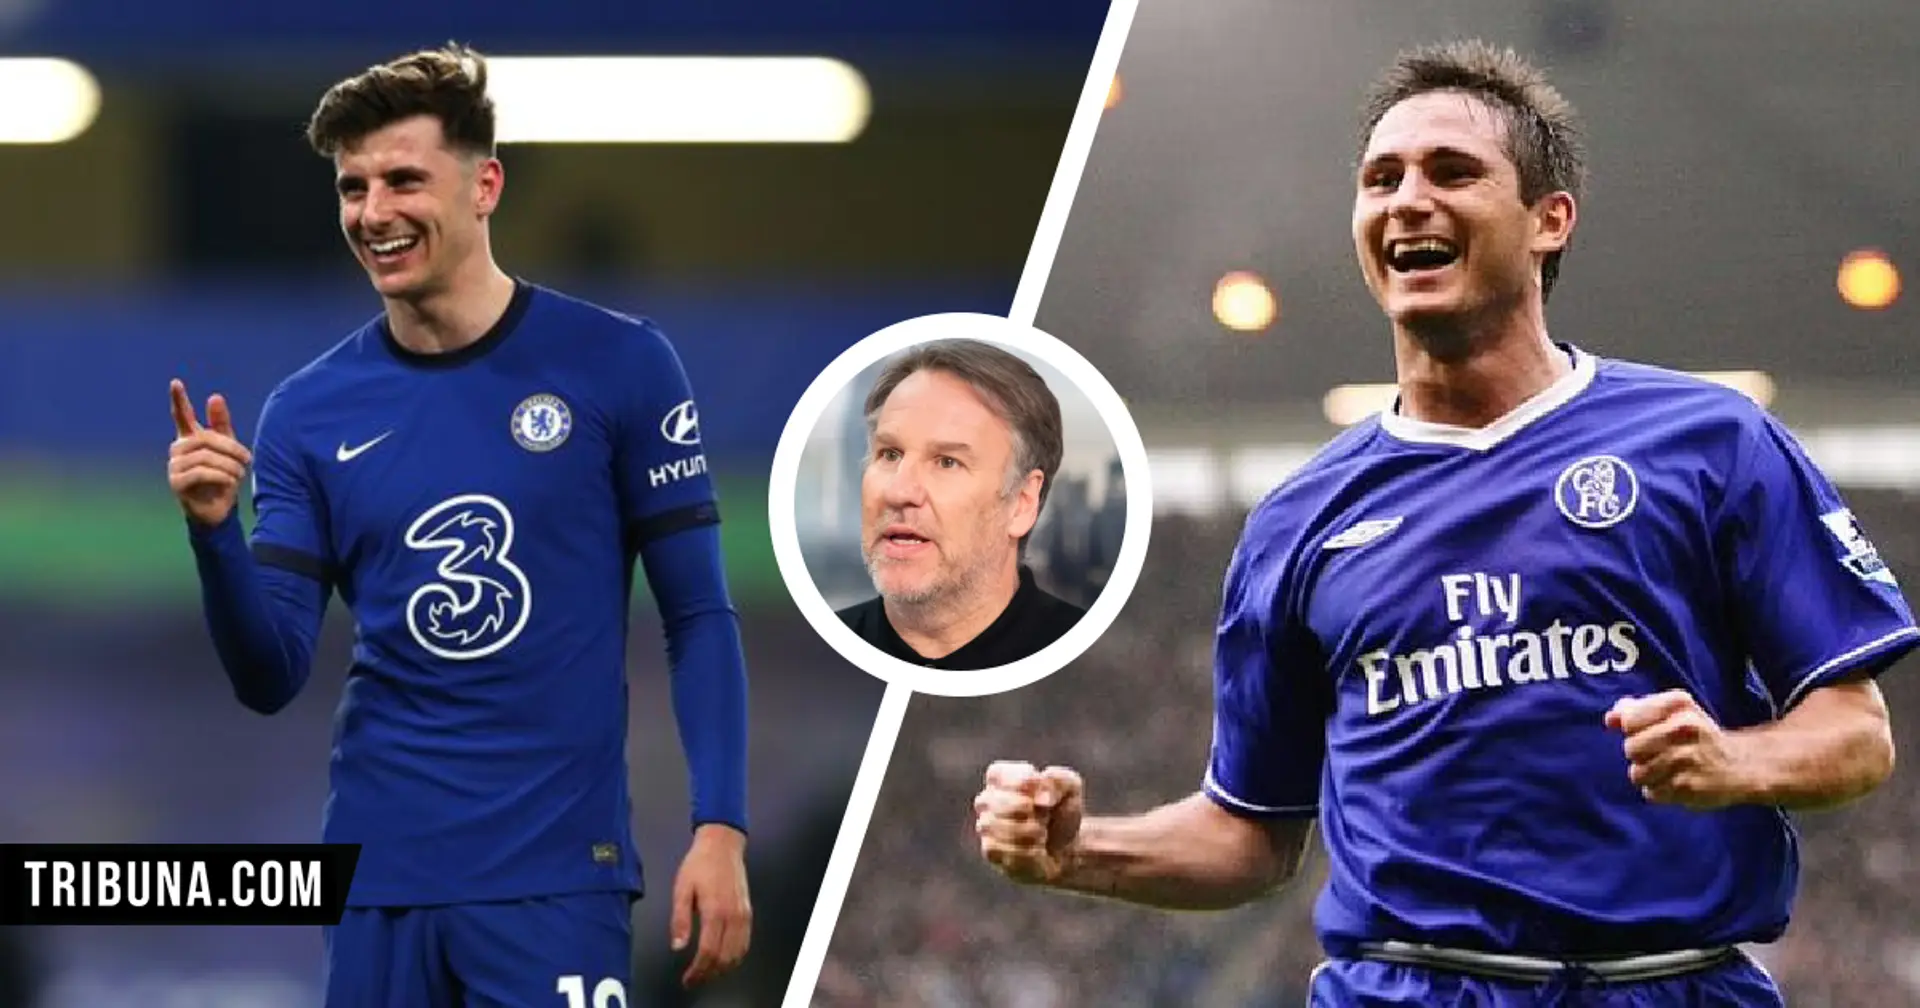 'He's the go-to man': Paul Merson names Mount most improved player while making Lampard comparison